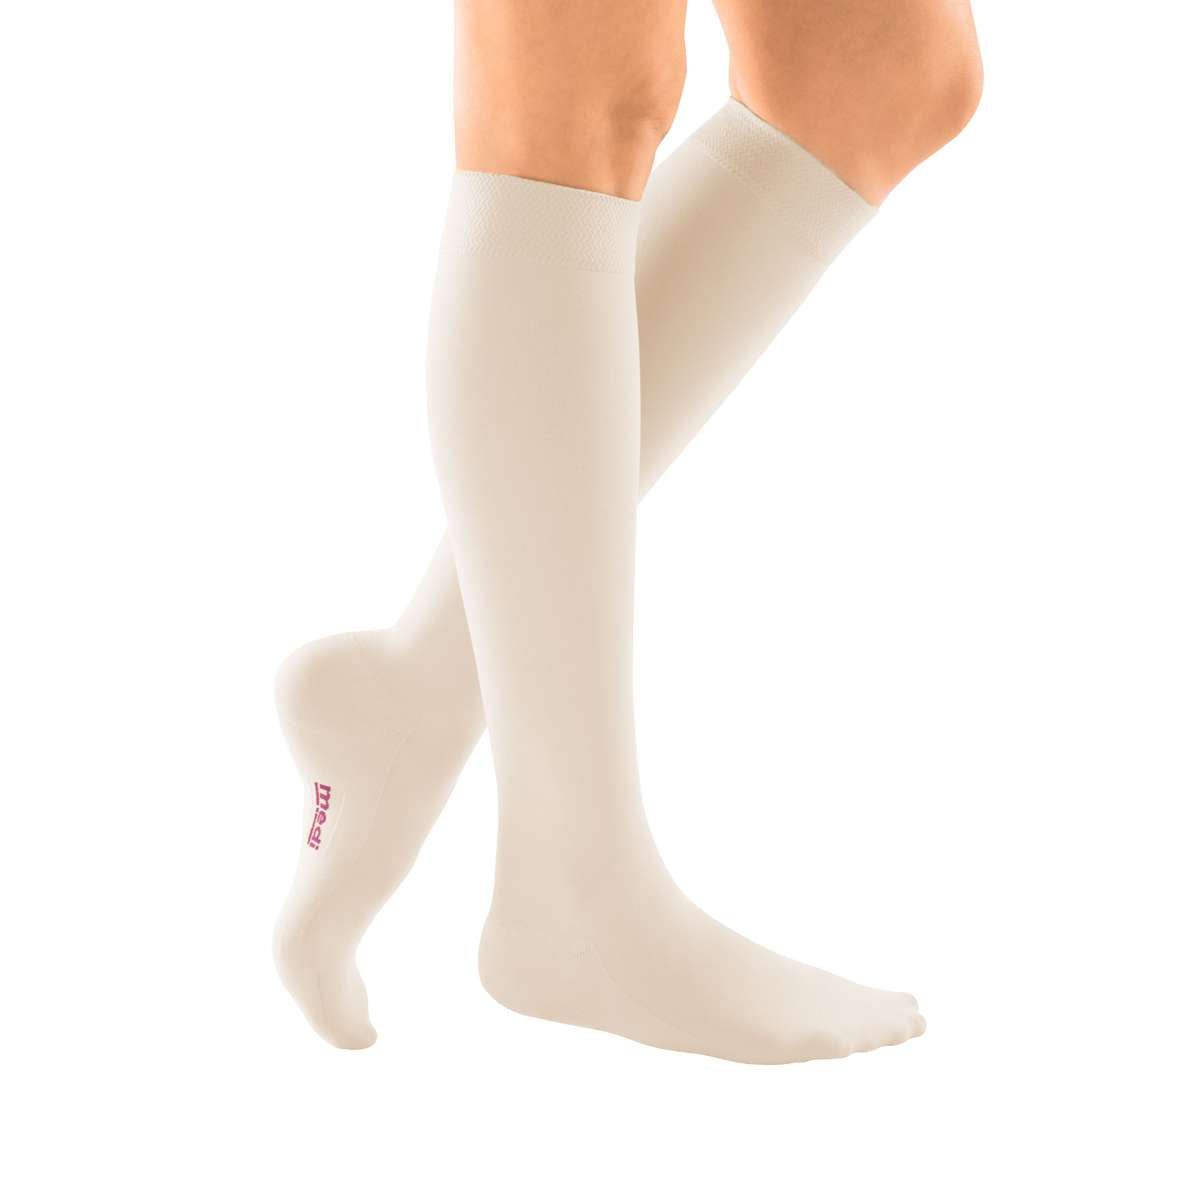 Medi USA Mediven Plus Closed Toe Thigh-High 20-30mmHg Compression Stockings  with Silicone Top